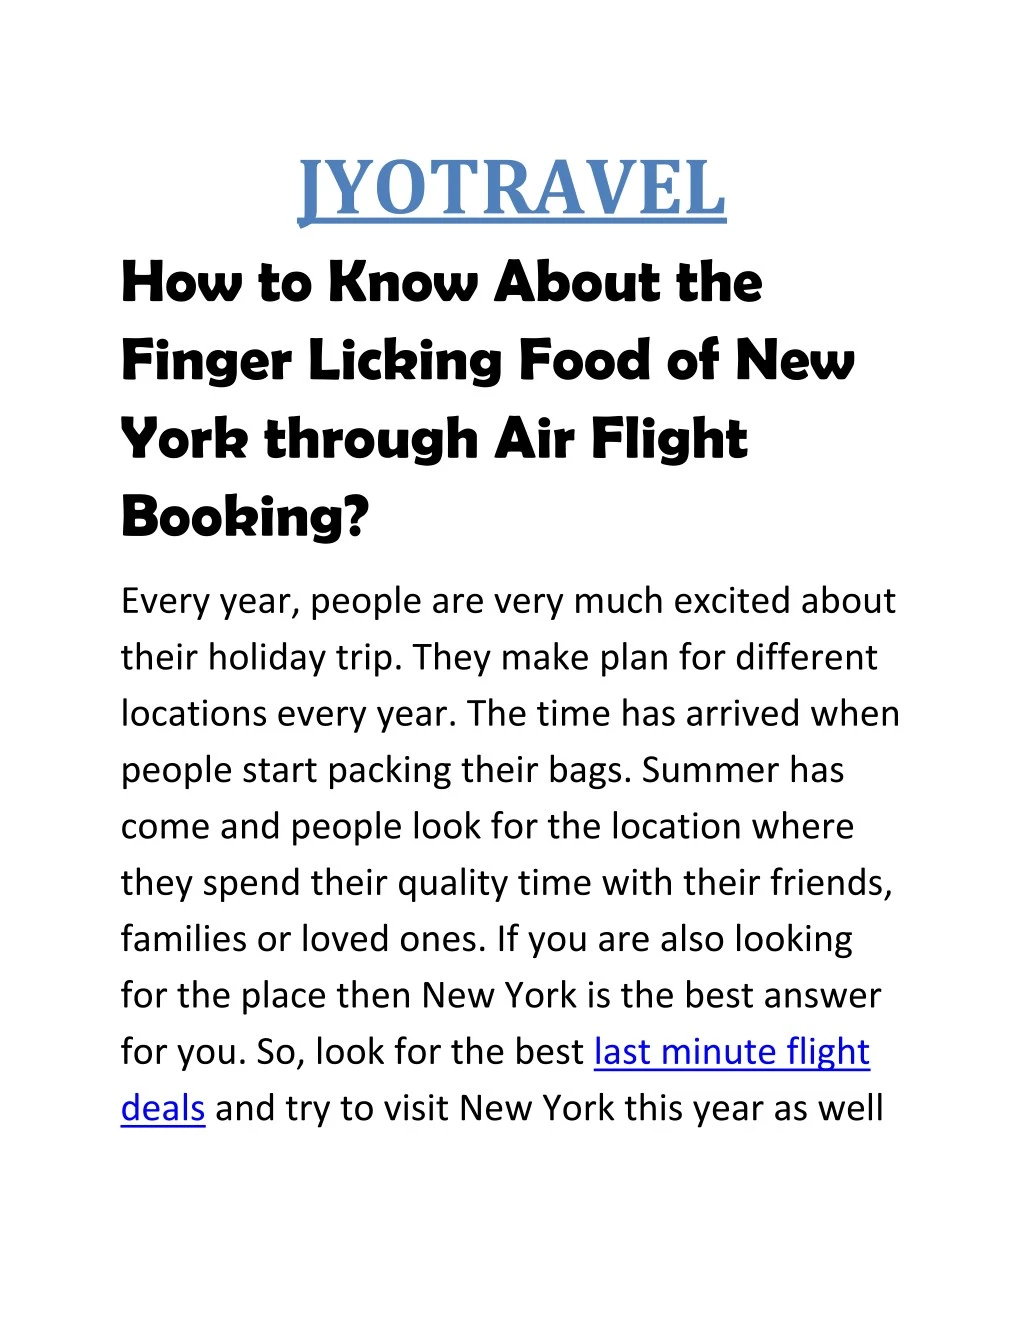 jyotravel how to know about the finger licking